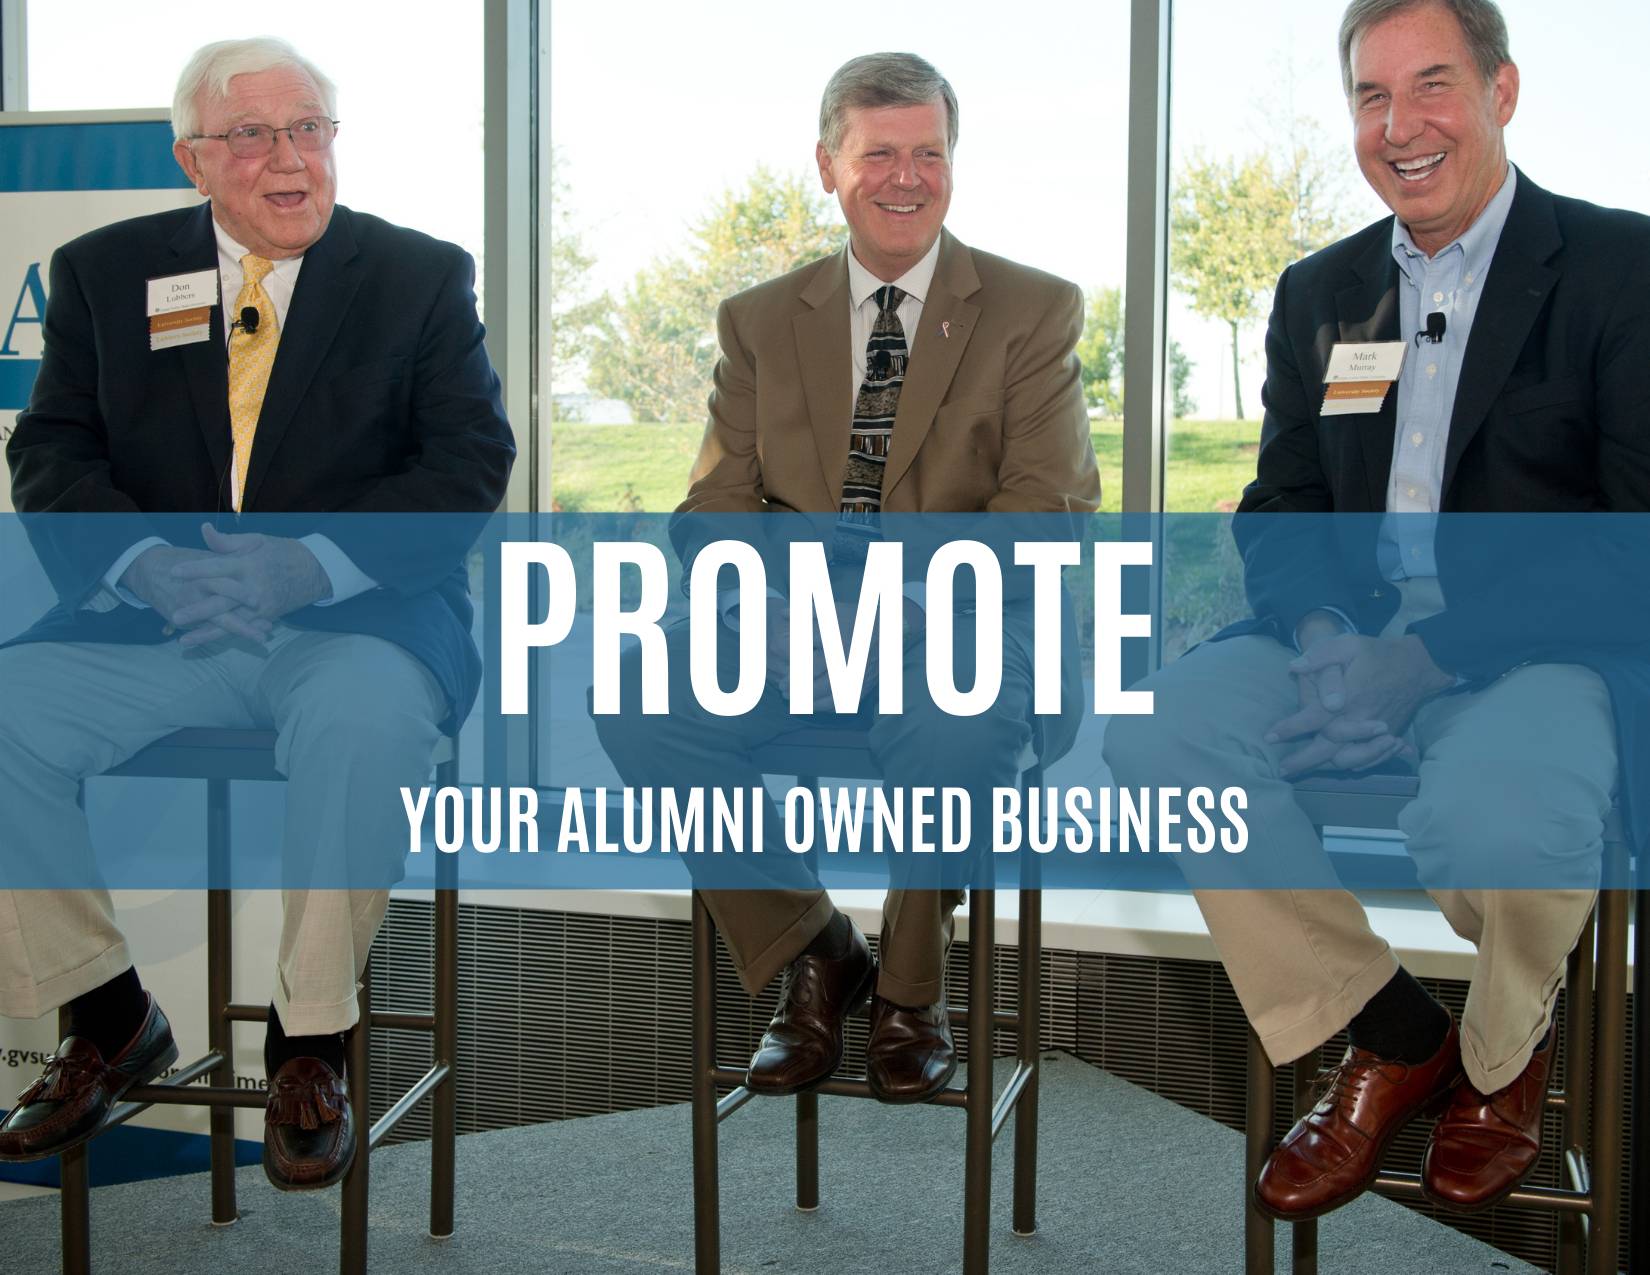 Promote your alumni owned business